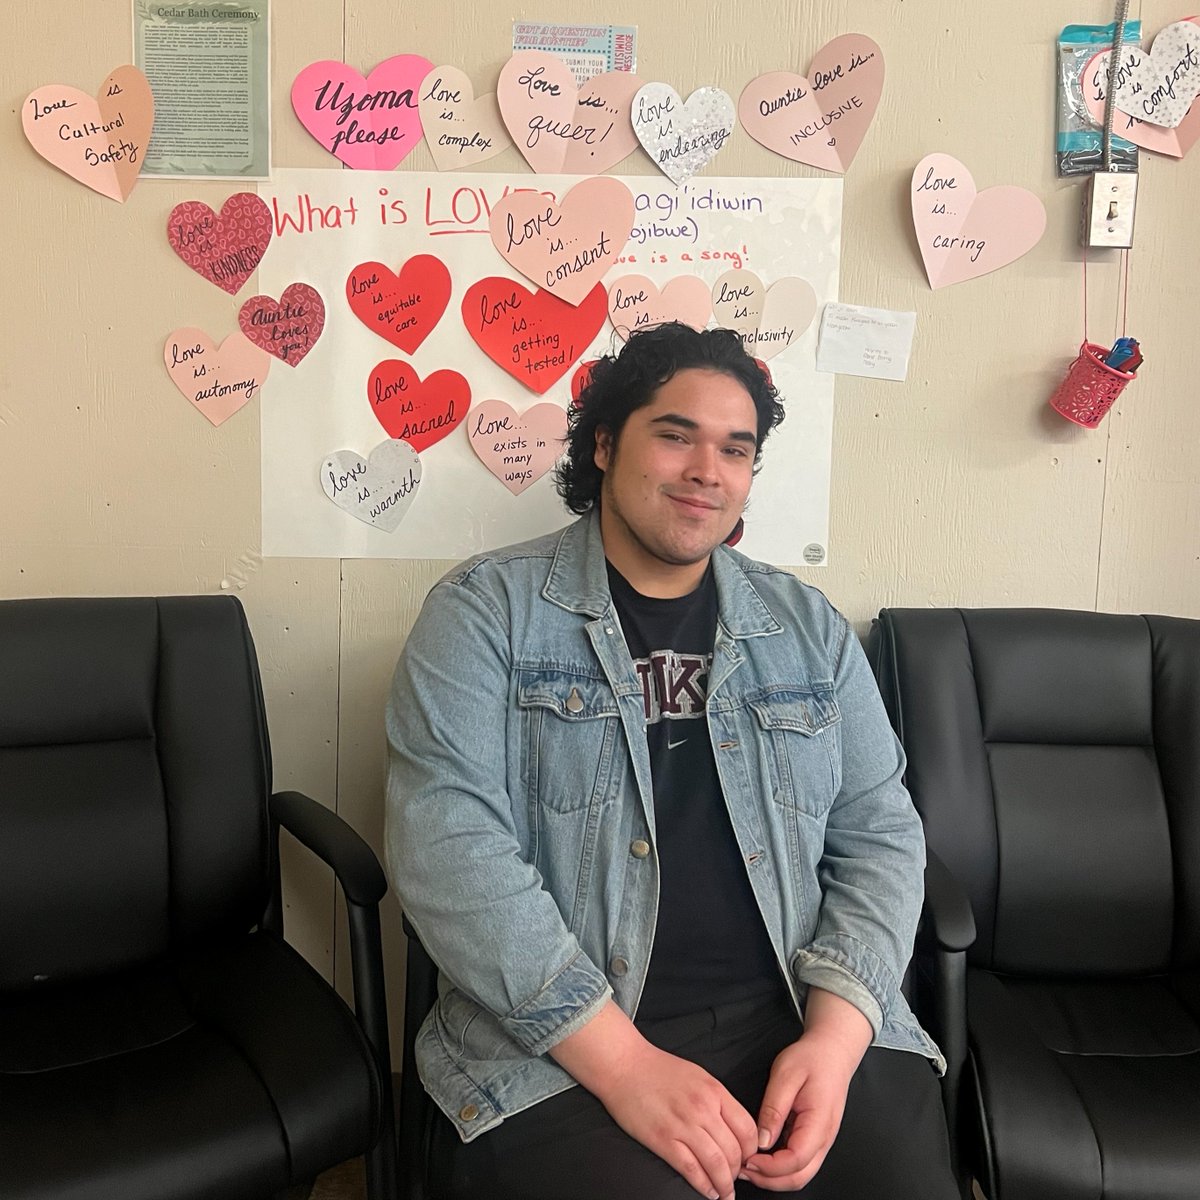 At the Lodge, sometimes we get asked, what is love? Love is… Equitable care! Love is… Cultural Safety Love is … Kindness In photo: Auntie Q in front of our Valentines from Project Valentine. 🥰 #GoAskAuntie #IndigenousSexualHealth #IndigenousClinic